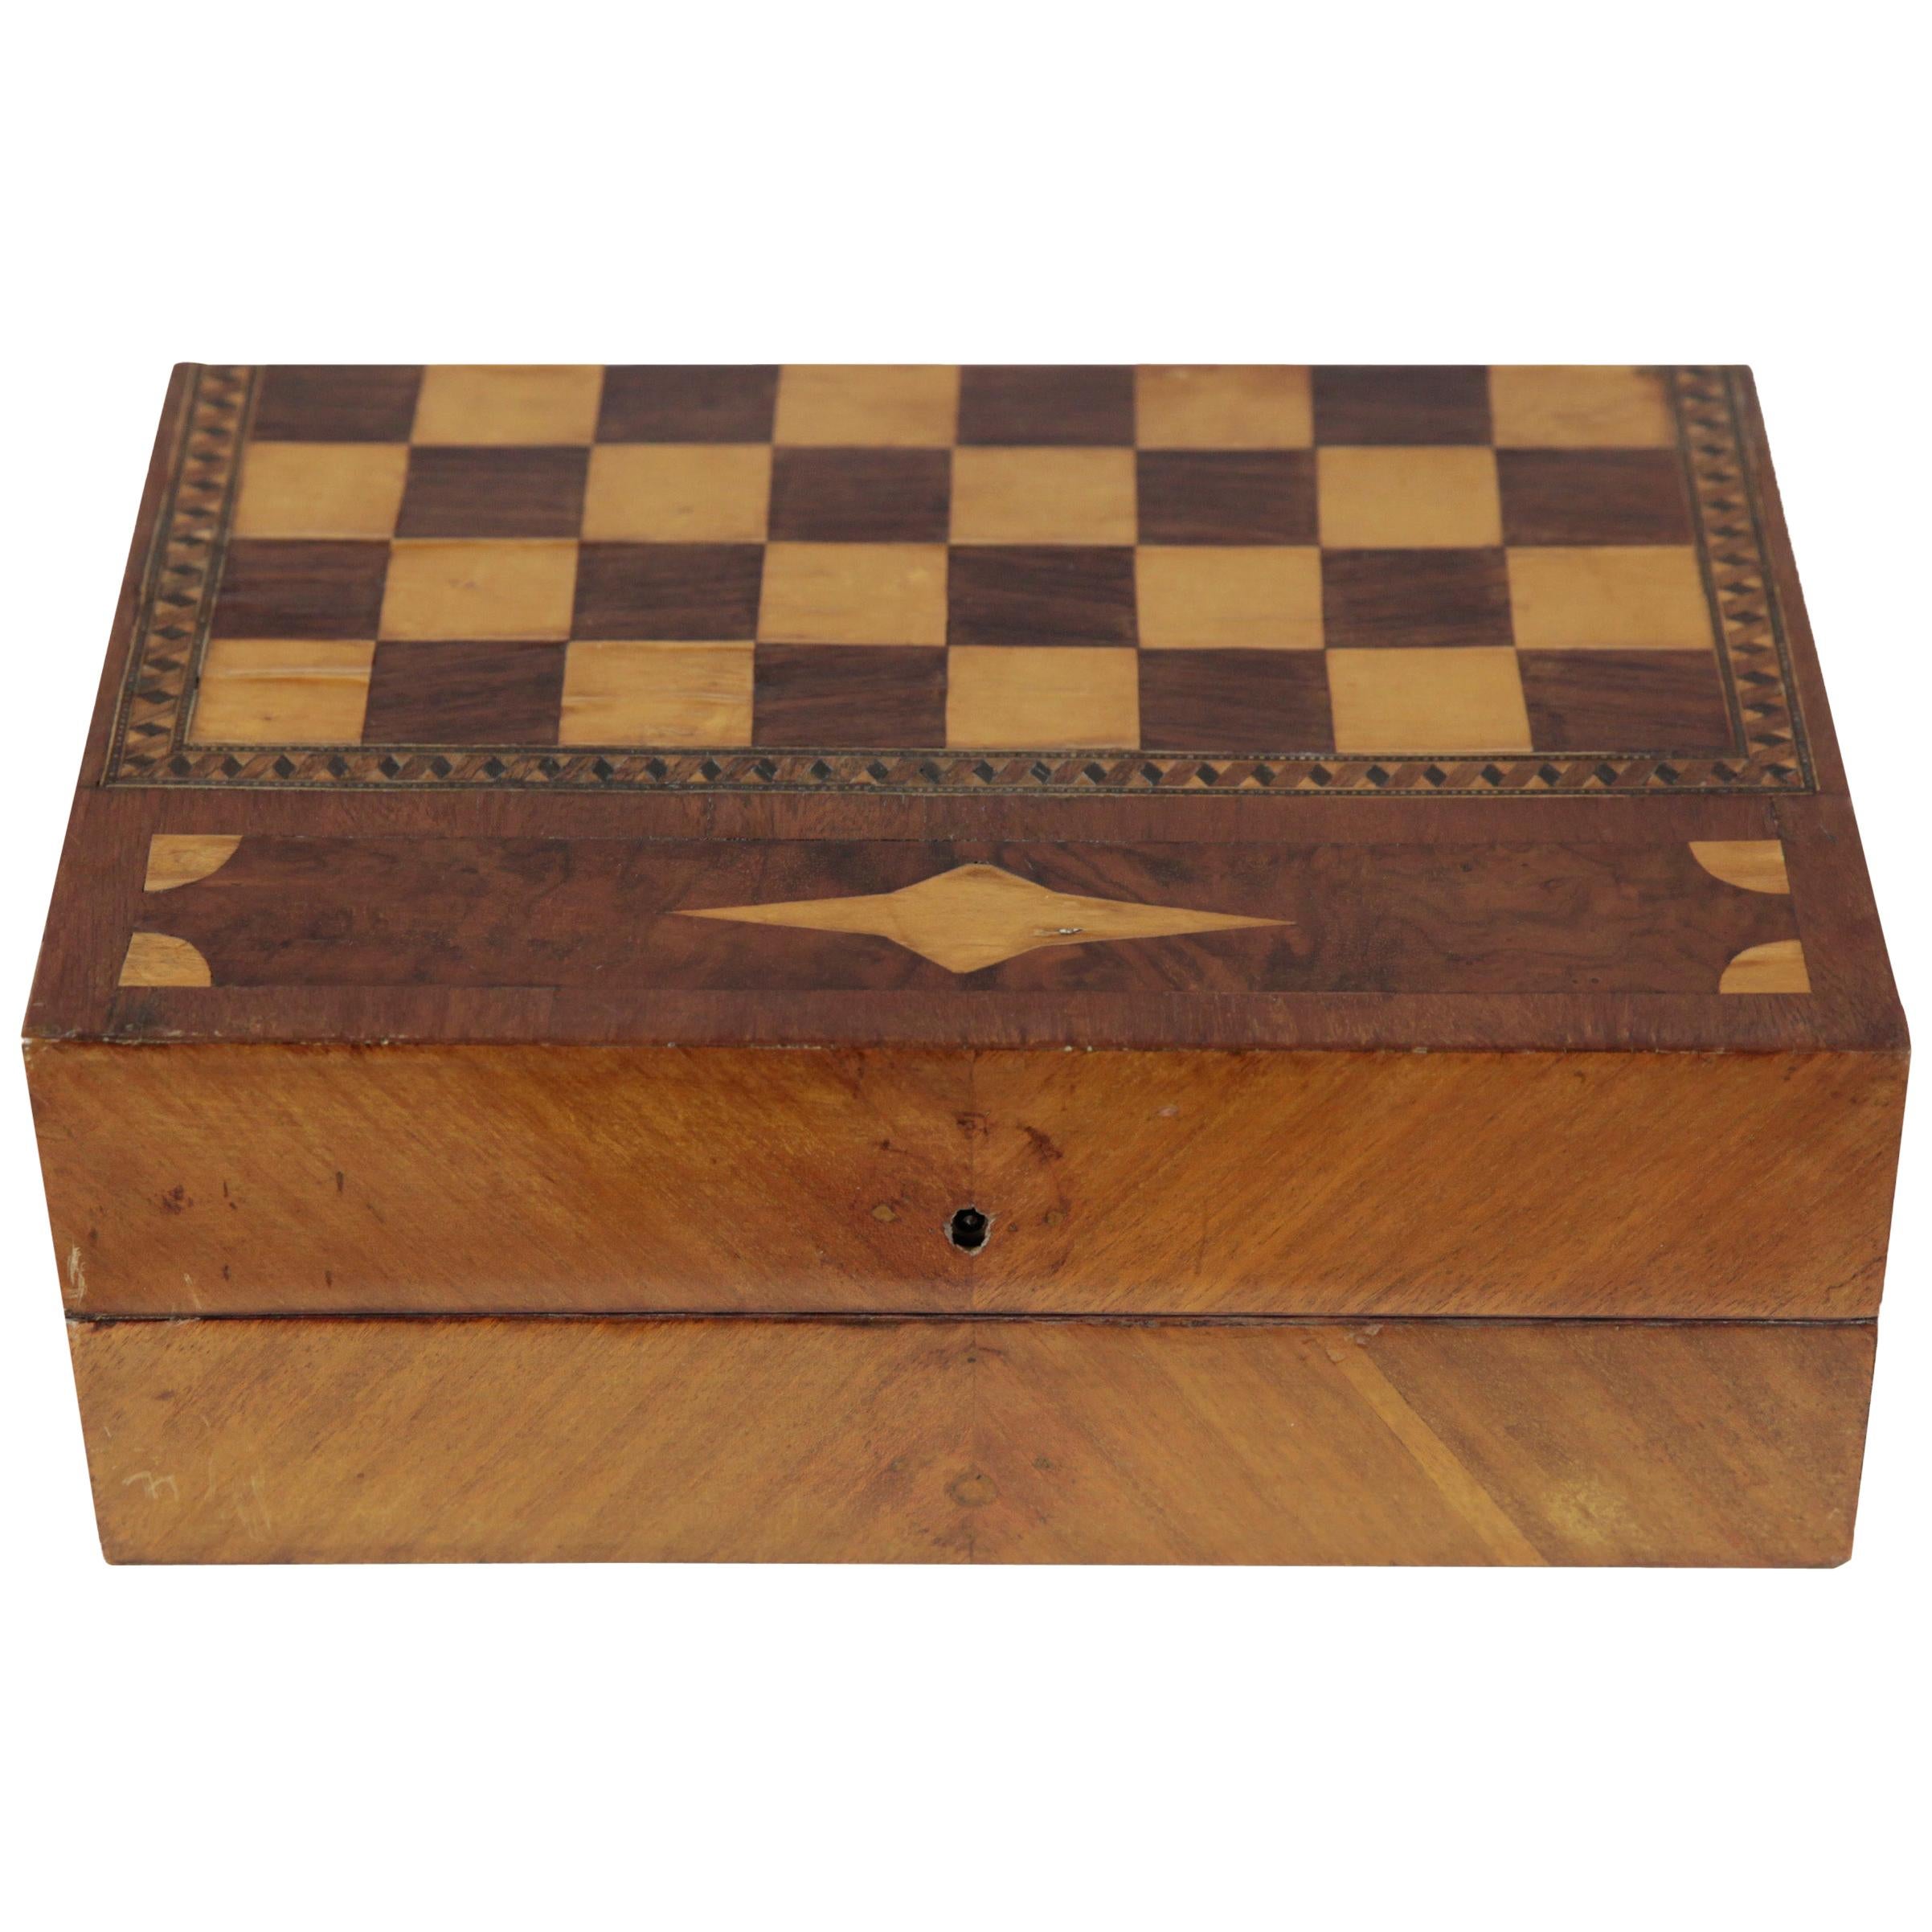 1920s Chess and Play Casket, Mahogany and Maple Veneer and Marquetry, Red Brown im Angebot